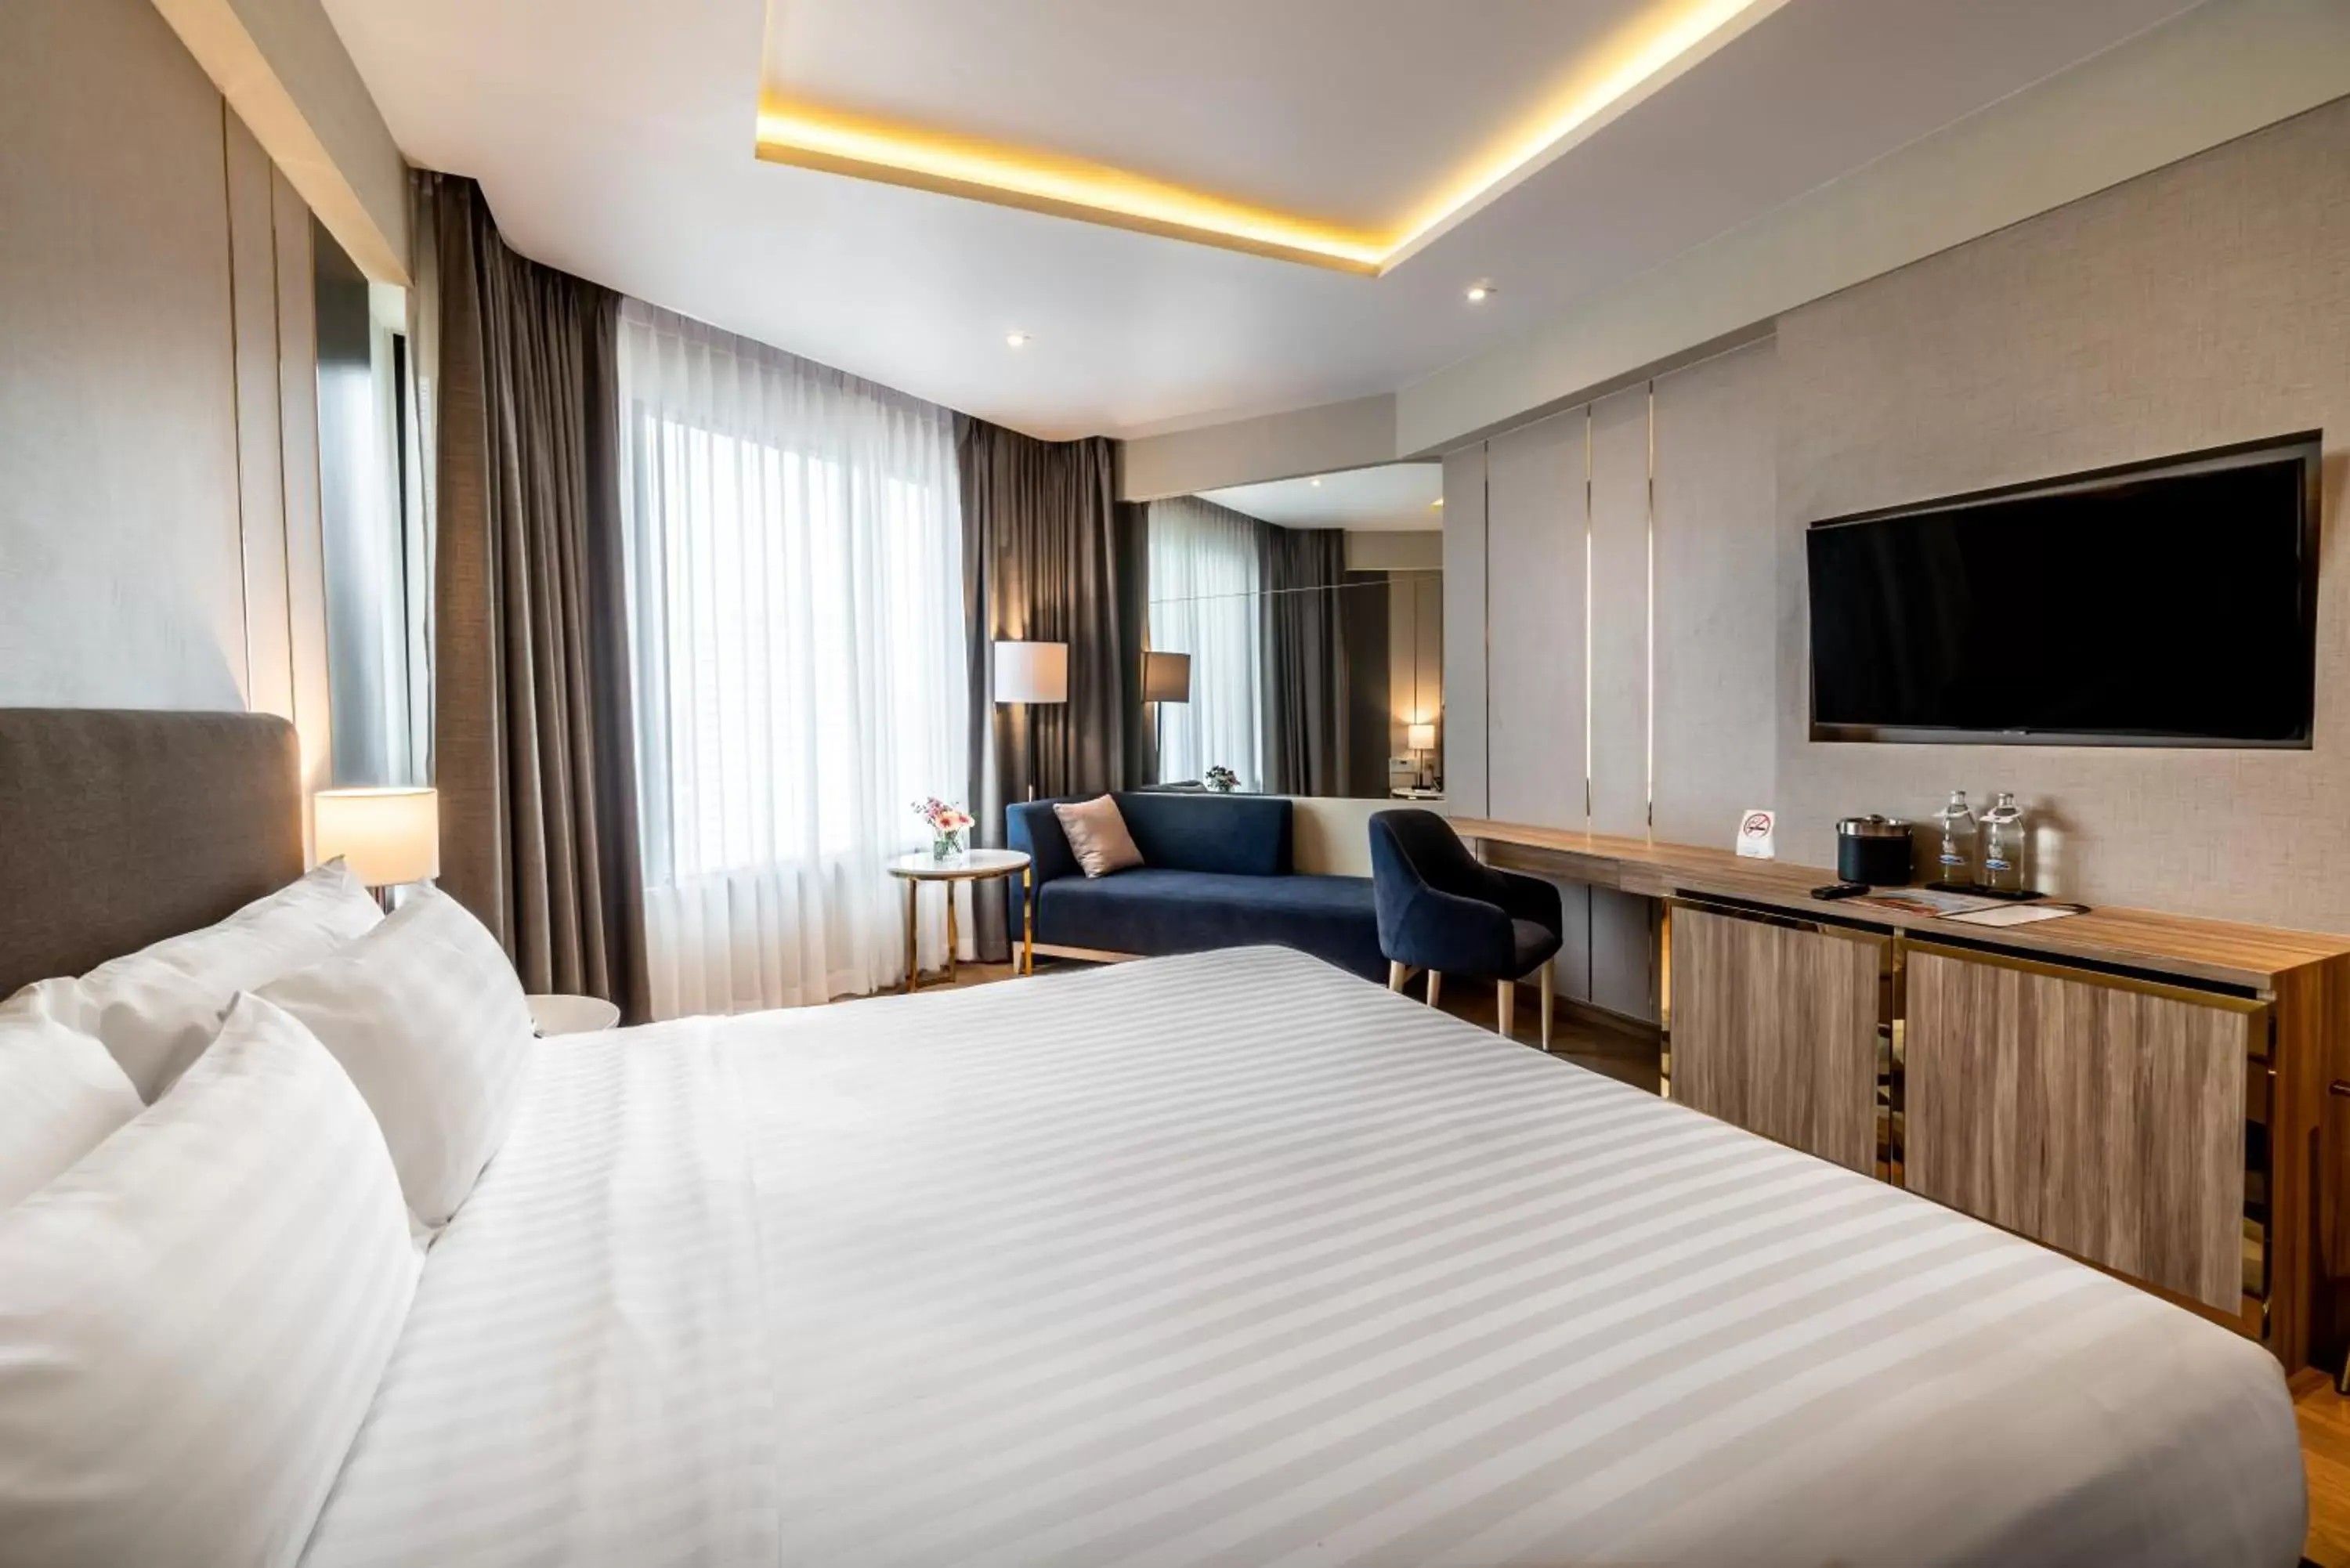  Premium Deluxe Room in Rembrandt Hotel and Suites SHA Plus Certified